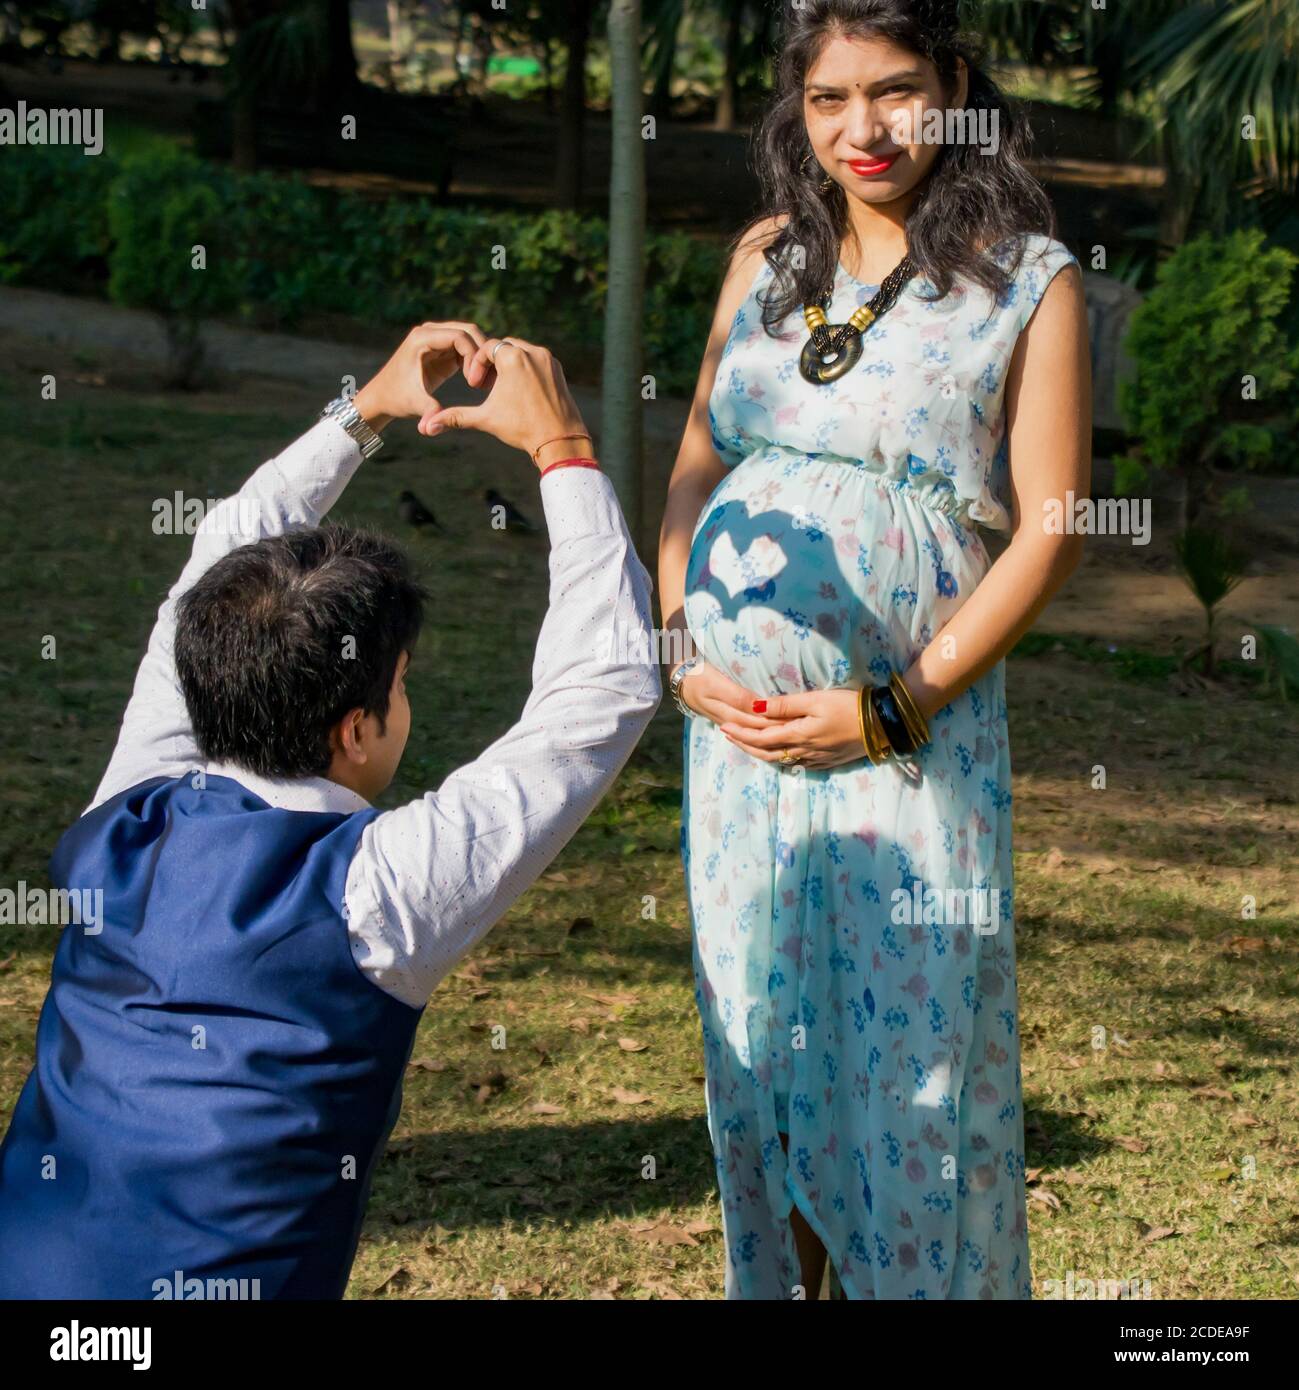 New Delhi India – March 13 2020 : Maternity shoot pose for ...